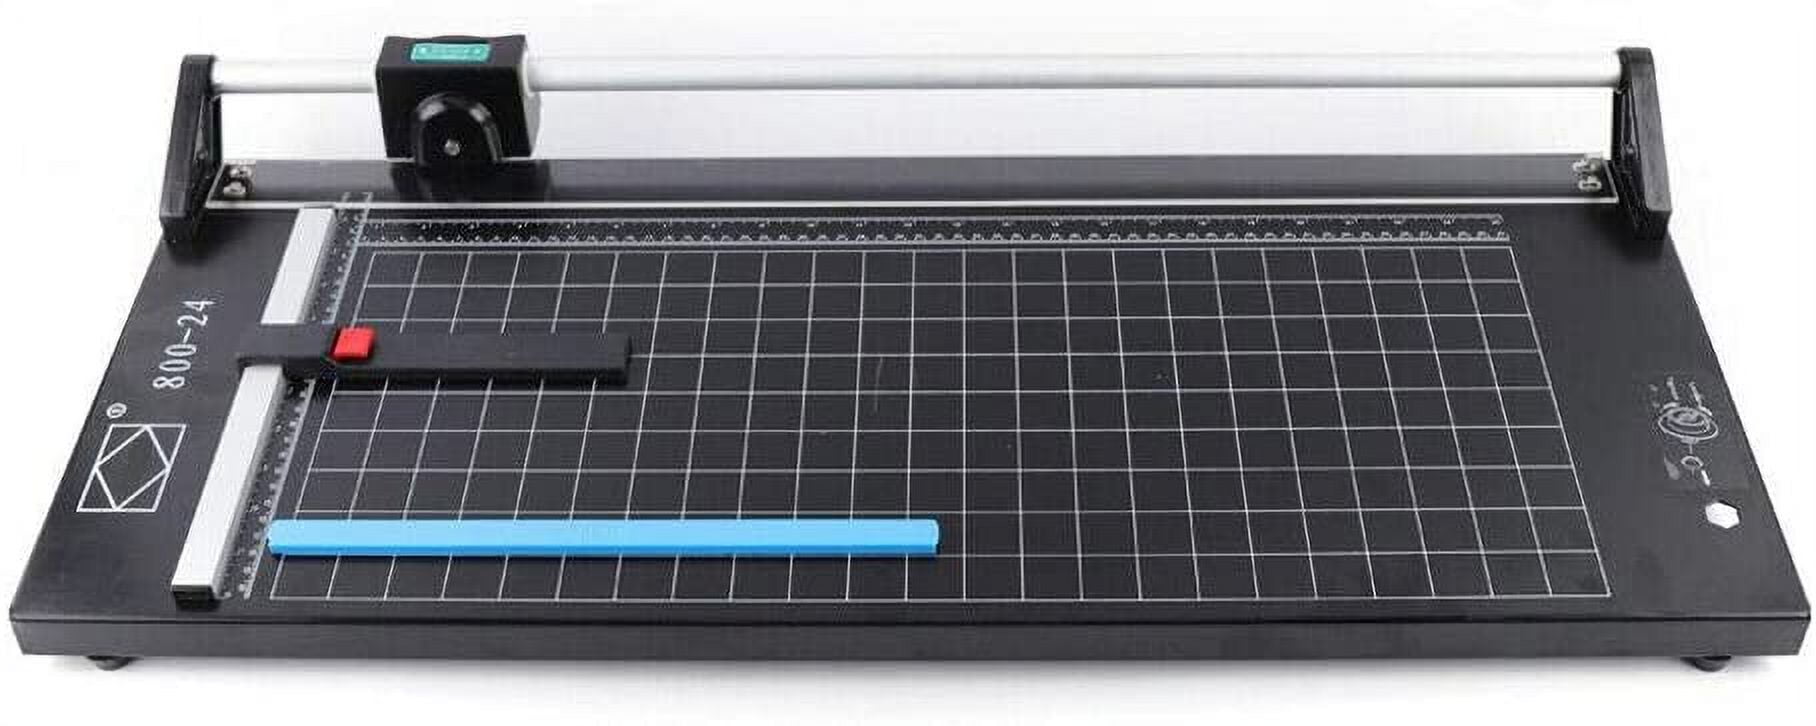 Wrapping Paper Cutter – Omni Basic